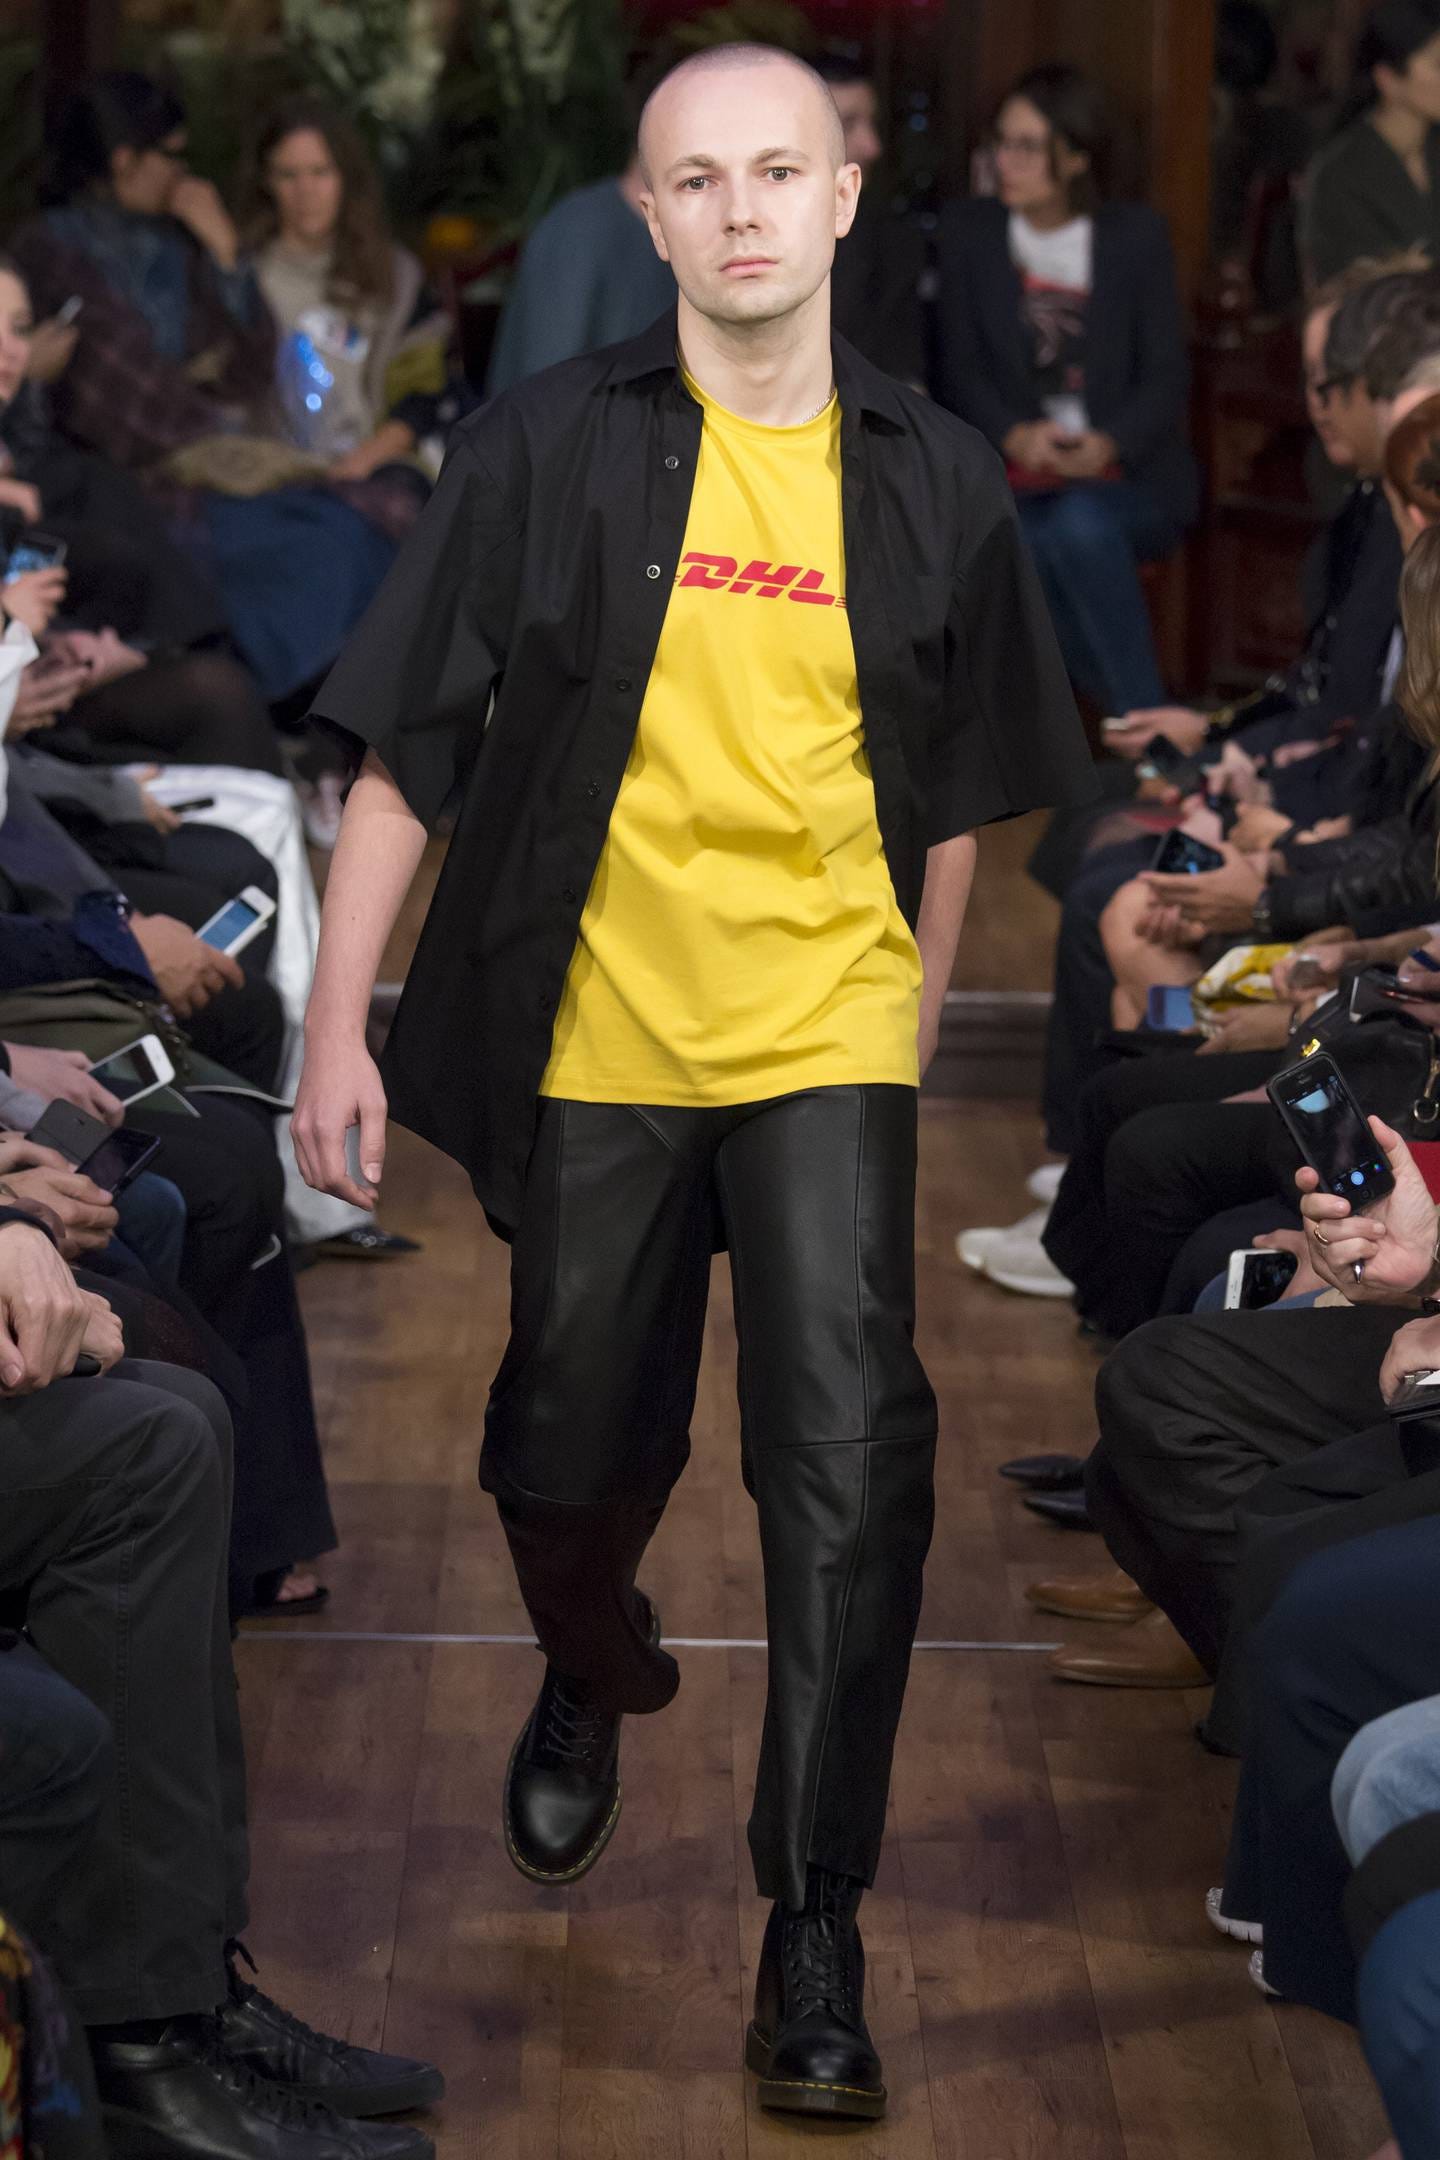 Fashion designer Gosha Rubchinskiy on the runway for Vetements, sporting the cult DHL T-shirt. Picture / Vogue Runway